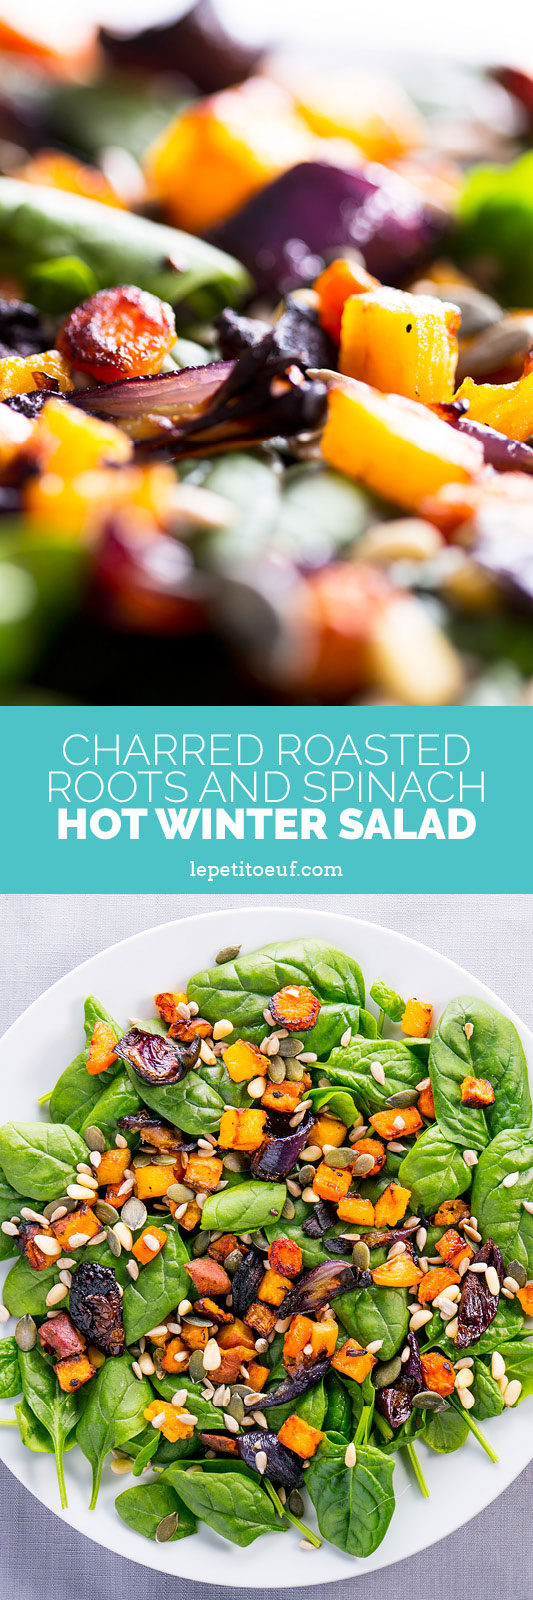 Charred roasted roots & spinach hot winter salad